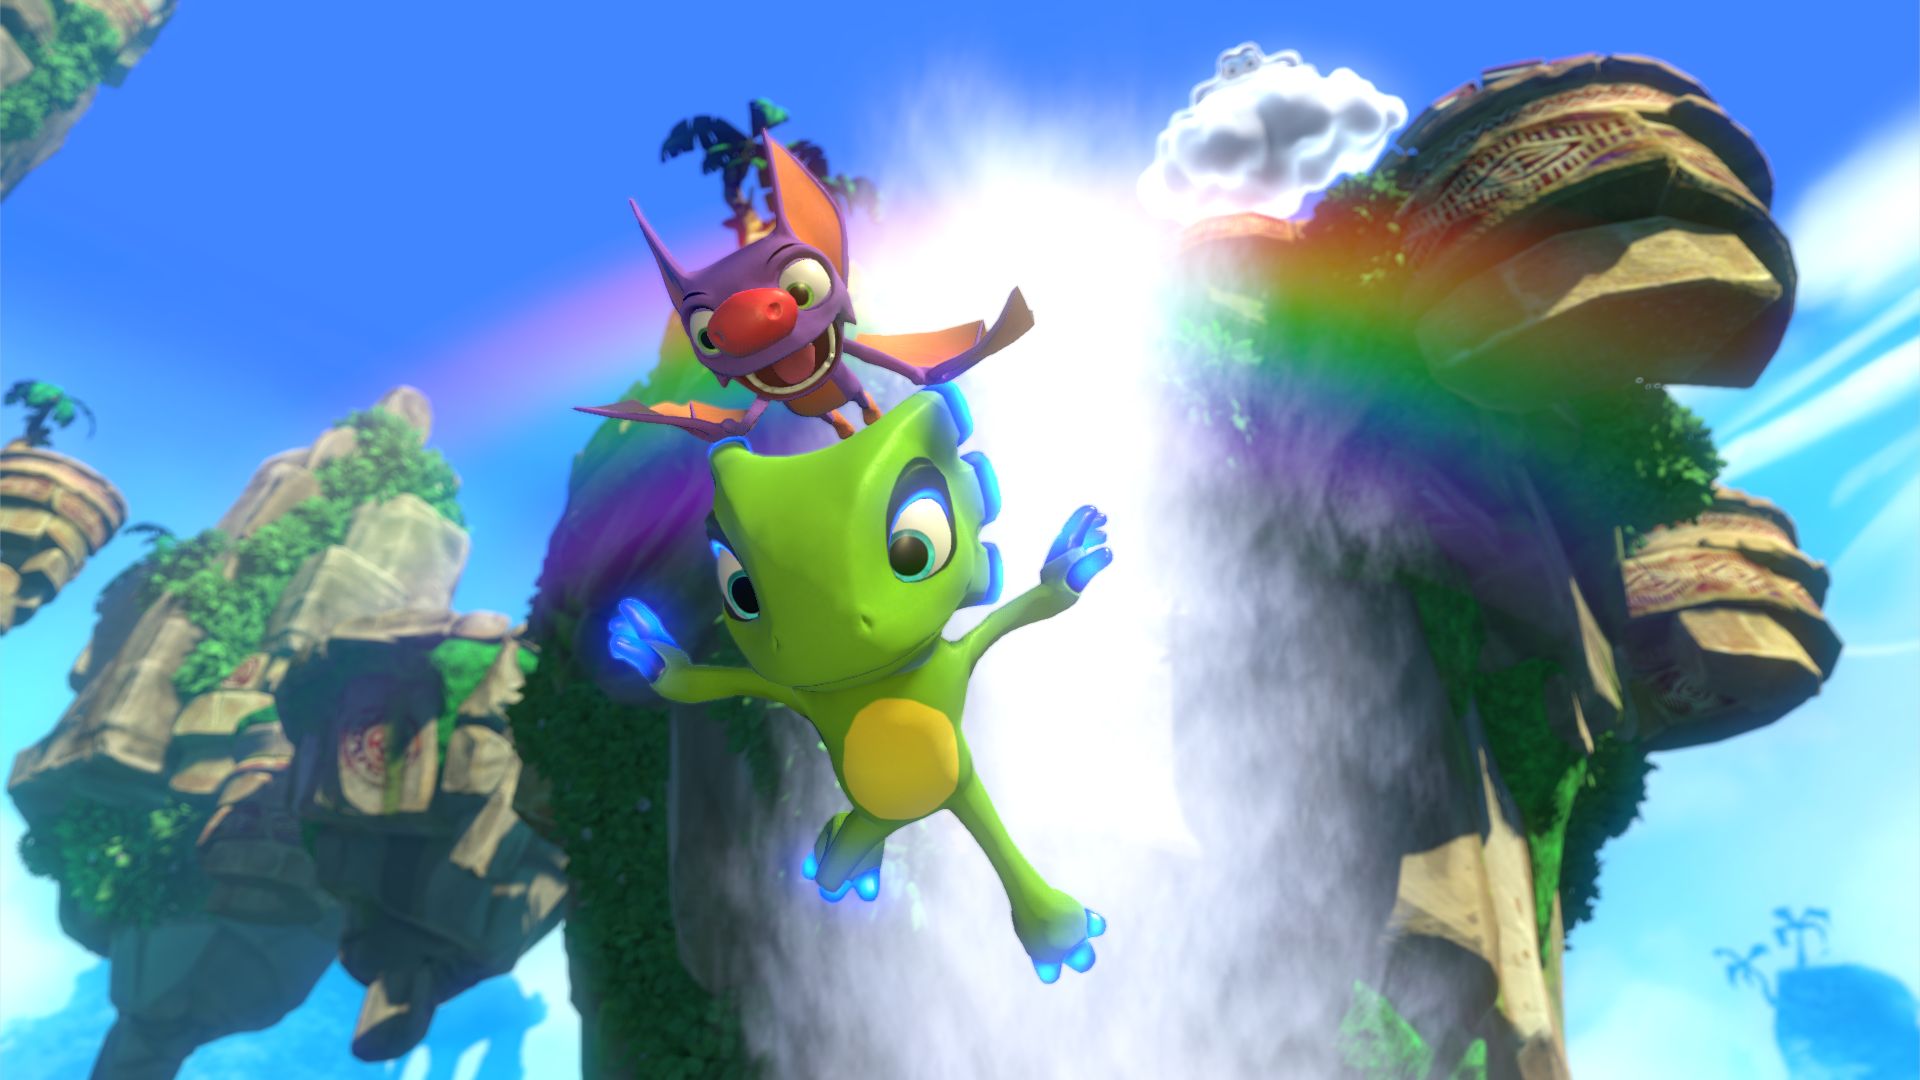 Yooka-Laylee E3 trailer showcases new gameplay and pushes back release date